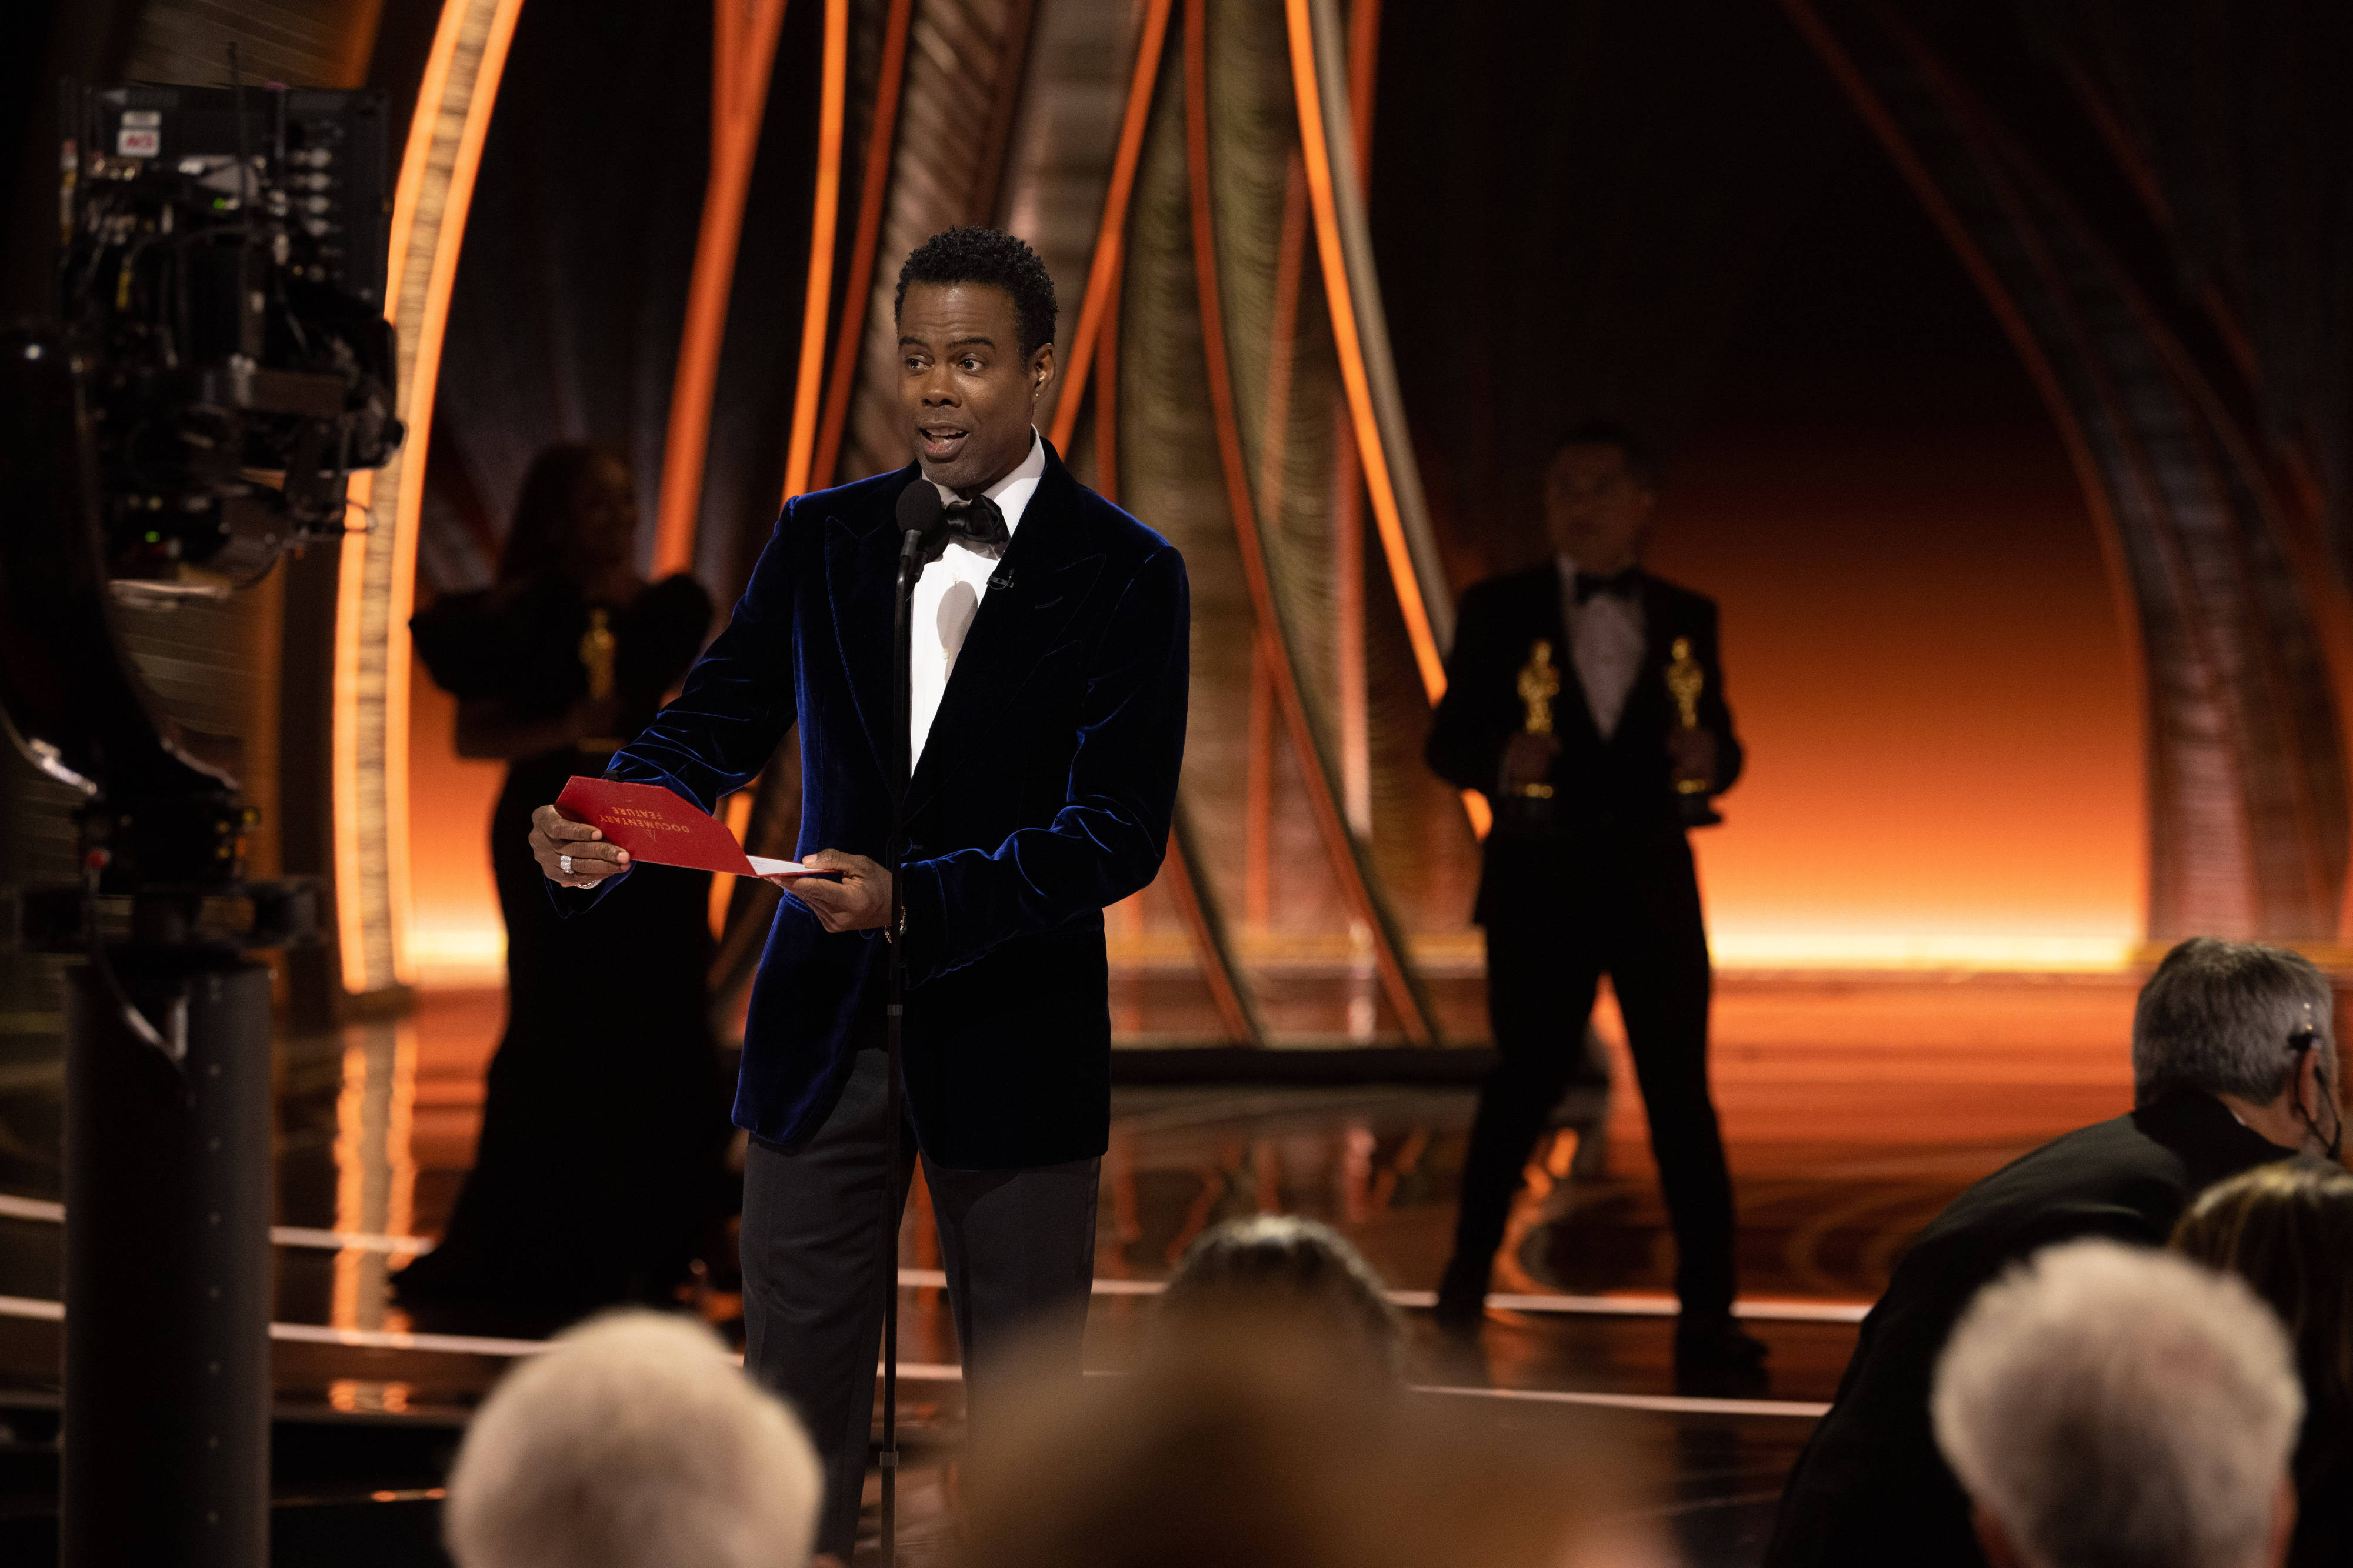 Chris Rock Breaks Silence on Will Smith's Oscars Slap: "I'm Still Kind Of Processing What Happened"